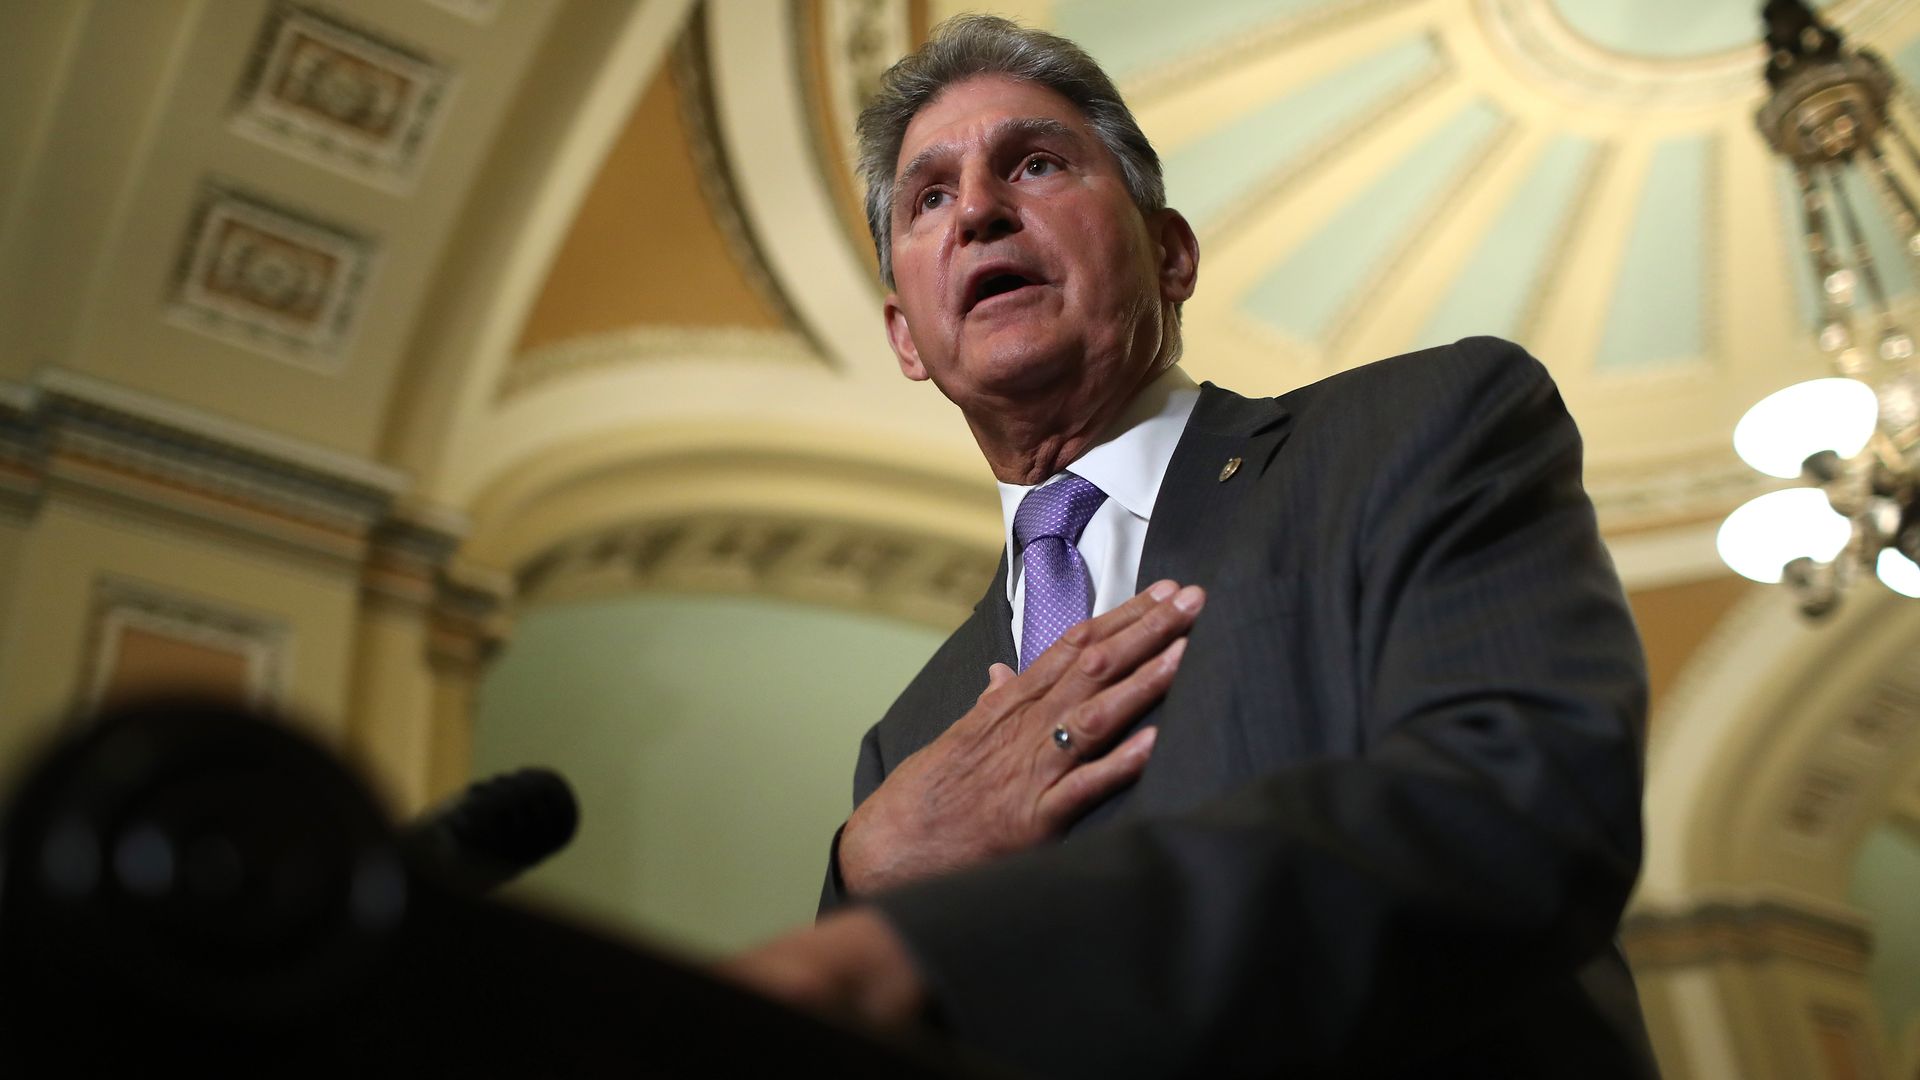 Joe Manchin Says He S Torn On Voting To Convict Trump In Senate Trial Axios